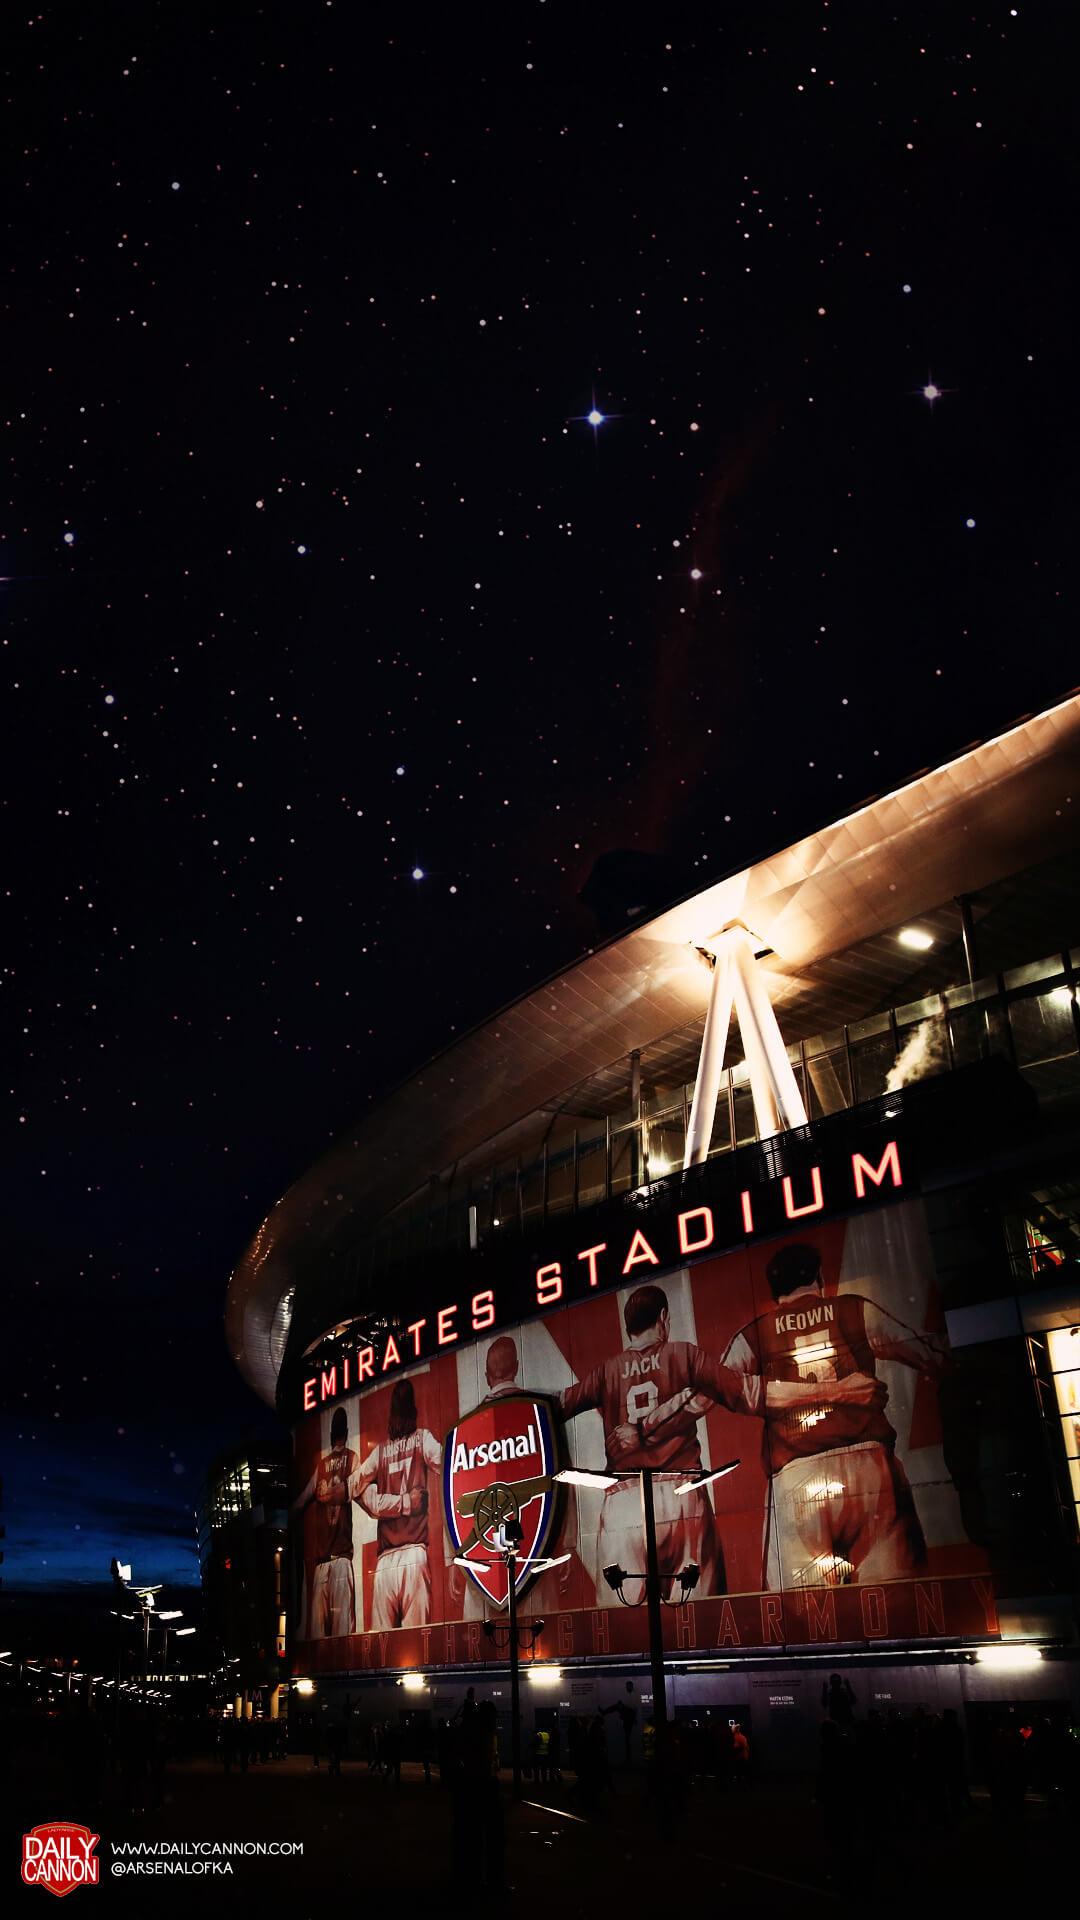 Superb Arsenal Mobile wallpaper from happier times